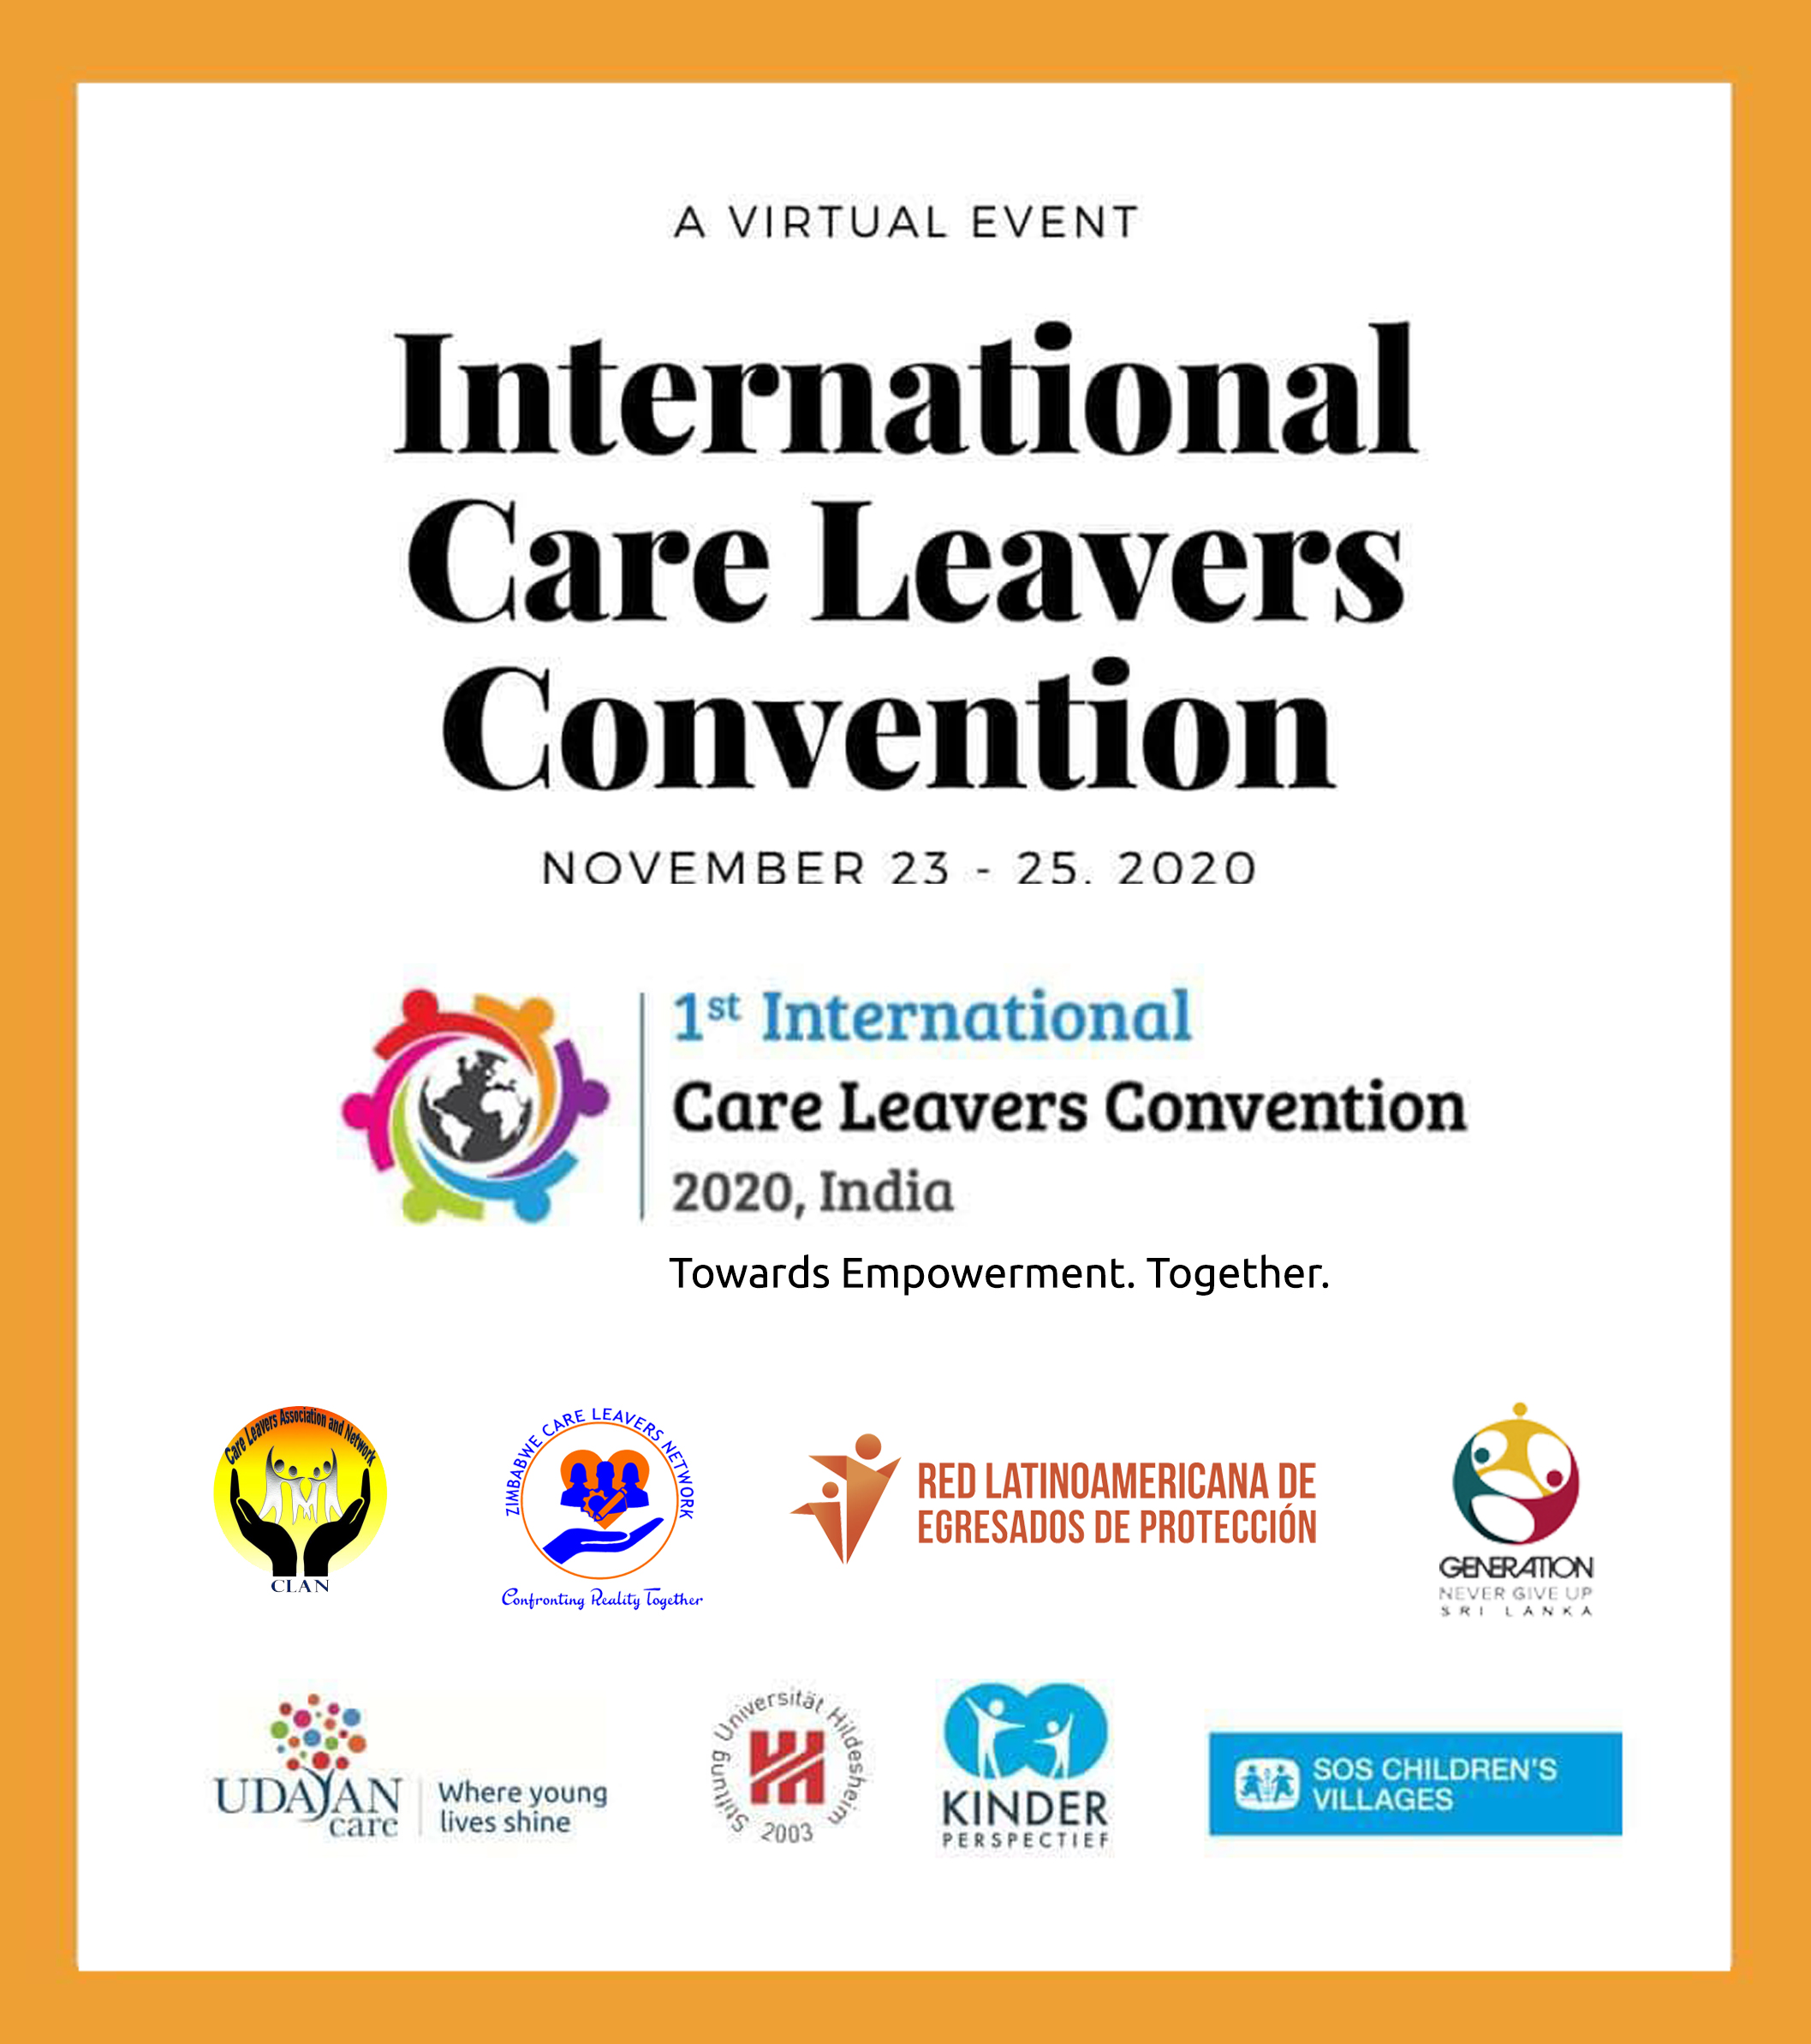 Ist International Care Leavers Convention